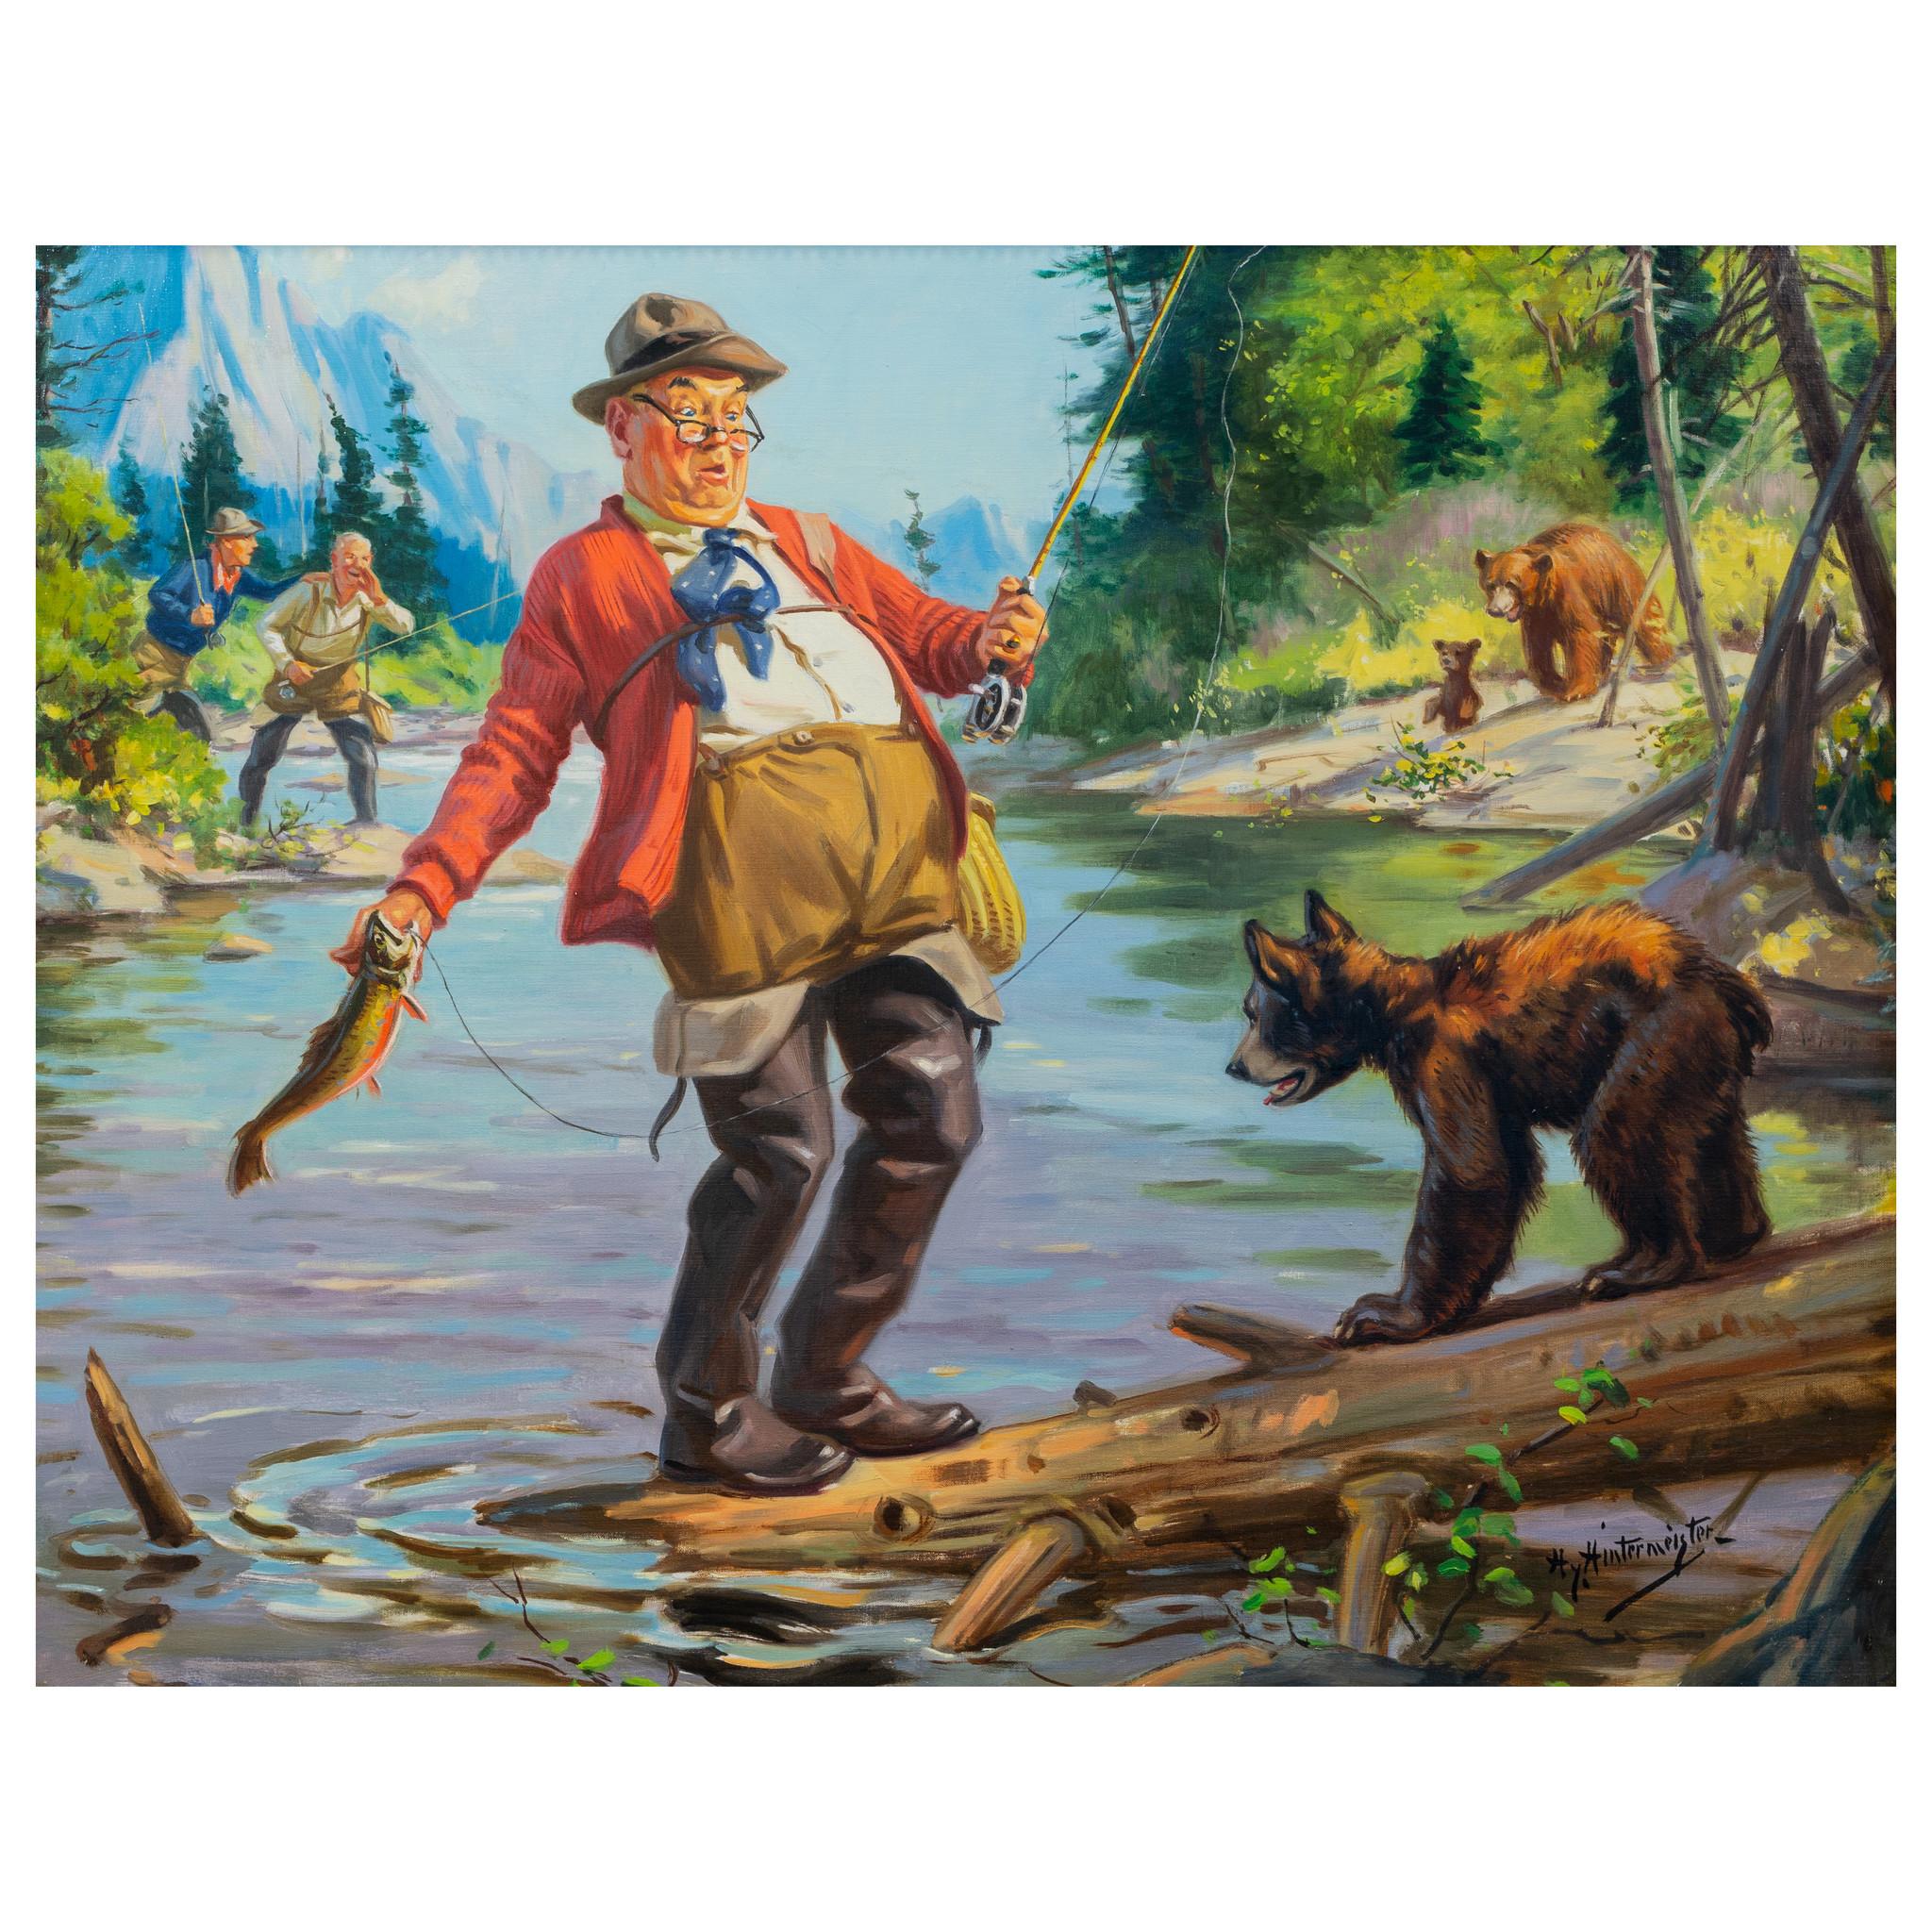 Oil on canvas by Hy Hintermeister 1897-1972. From the archives of the Shaw Barton Calendar company. Used for early calendar print. Part of the humorous fishing series he started. 27”x22”. Well framed.

Henry Hintermeister was born in 1897 in New